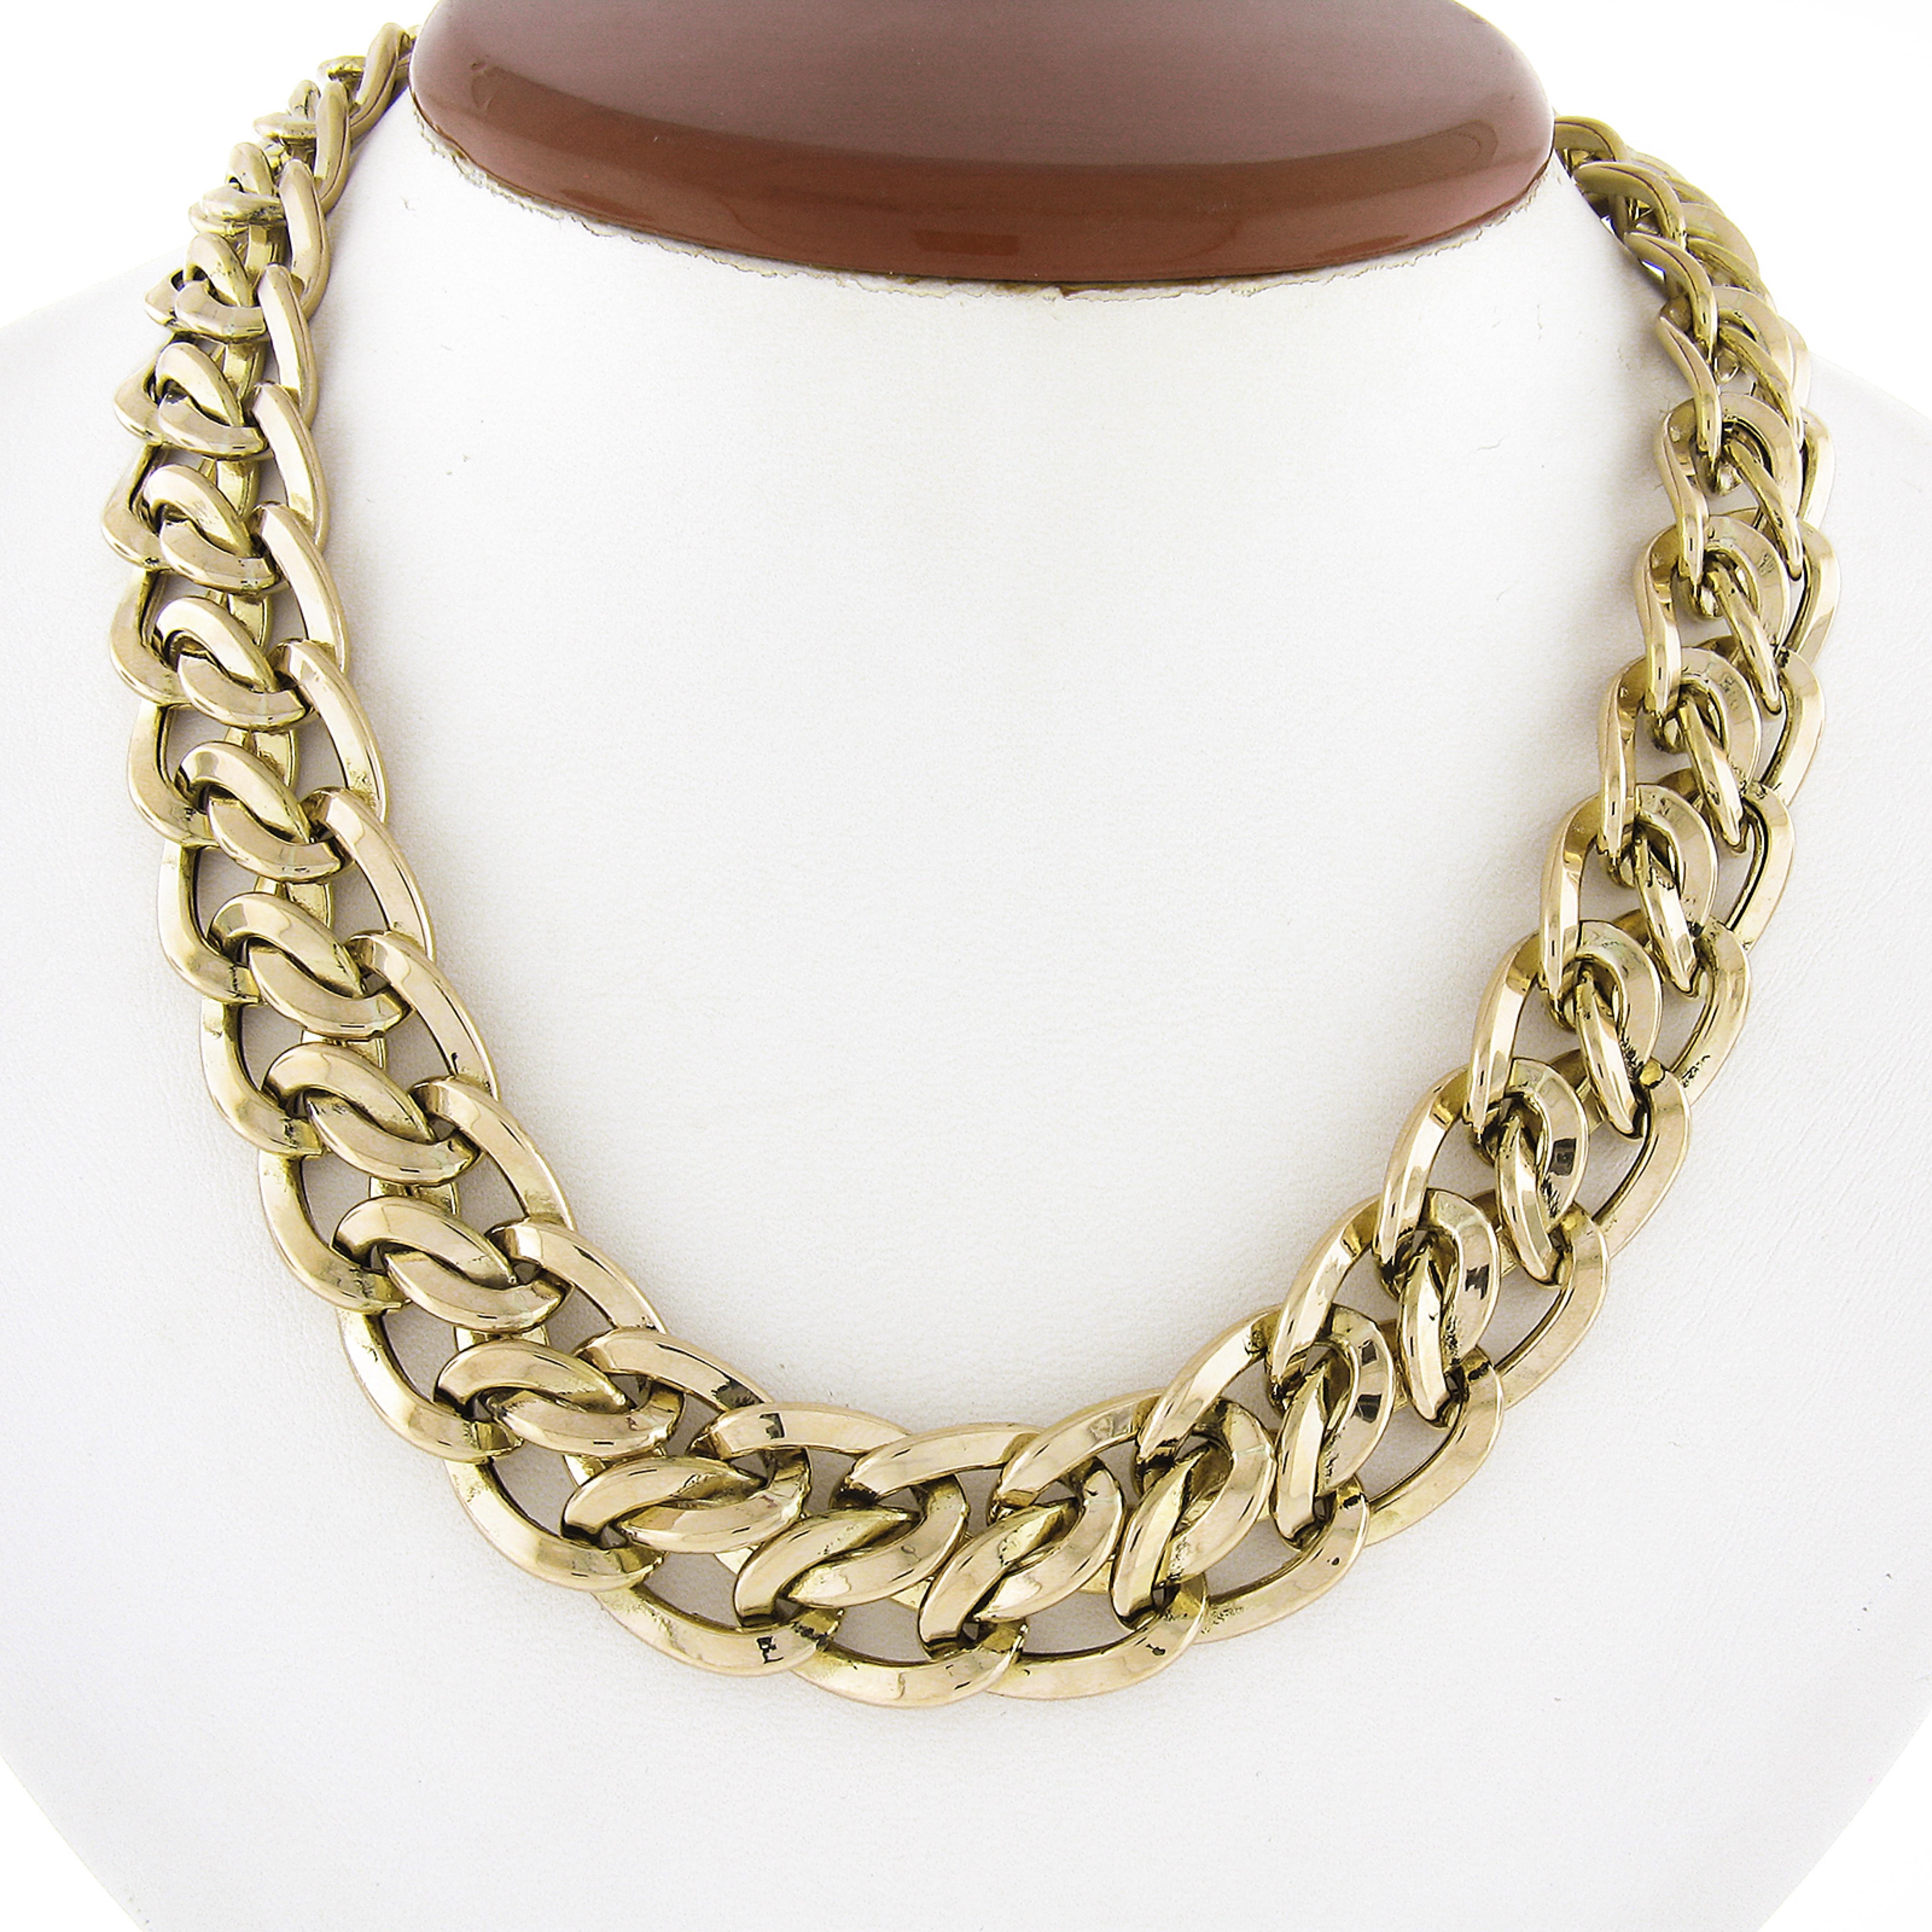 This Italian UnoAErre interlocking link statement chain necklace is crafted from solid 14k yellow gold. It features a wide polished finish elegant design. The necklace is in excellent condition! Substantial necklace with excellent neck coverage!